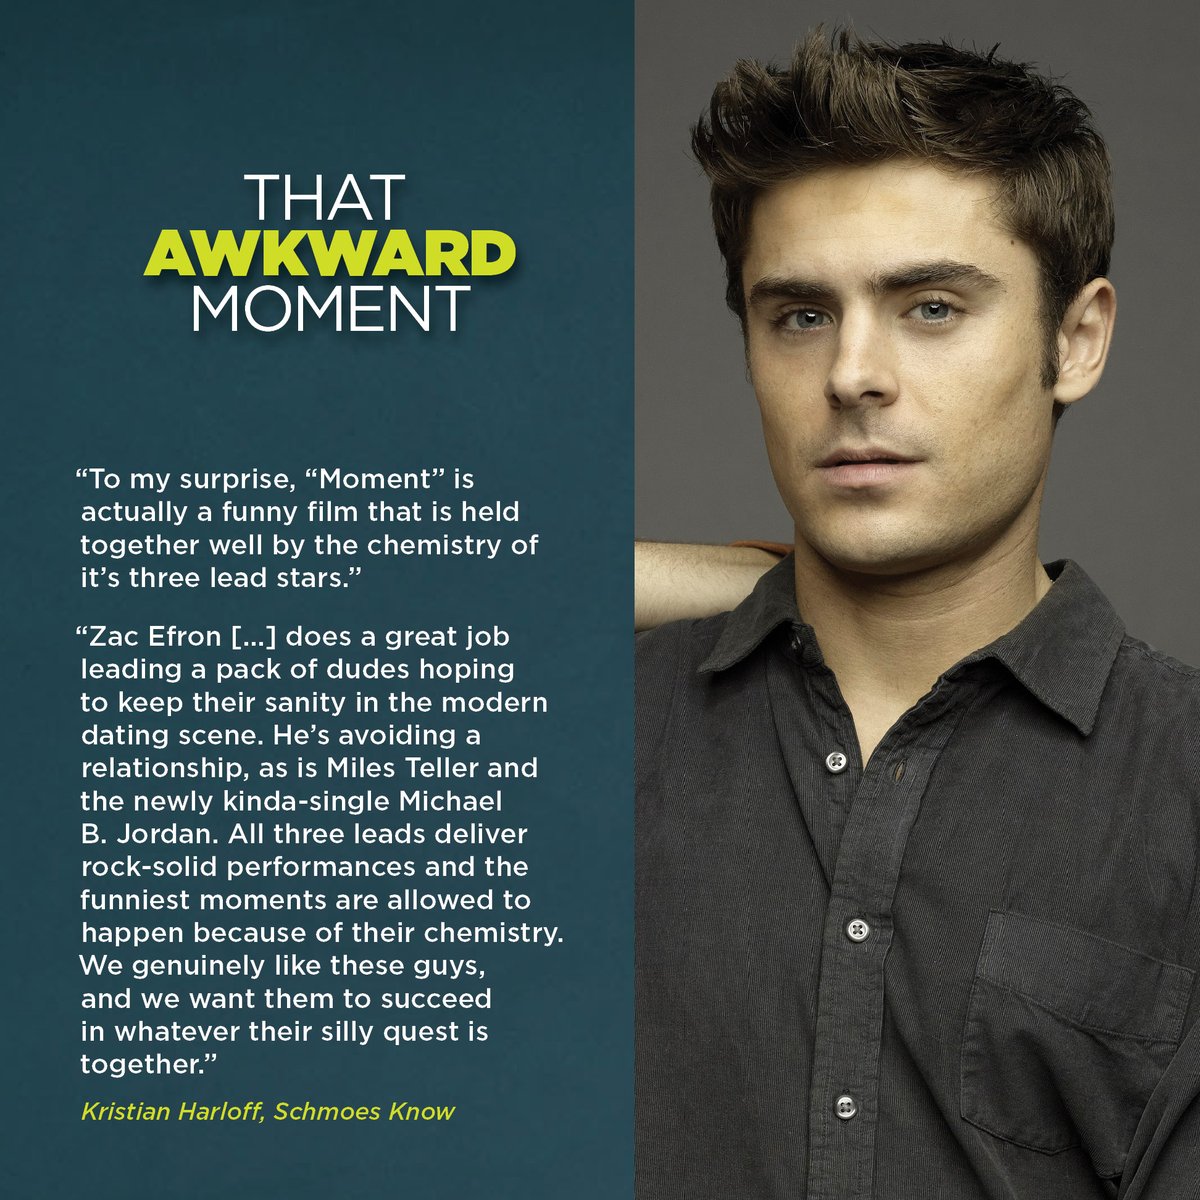 “Zac Efron [...] does a great job leading a pack of dudes hoping to keep their sanity in the modern dating scene.”

#ThatAwkwardMoment #TAM #ZacEfron